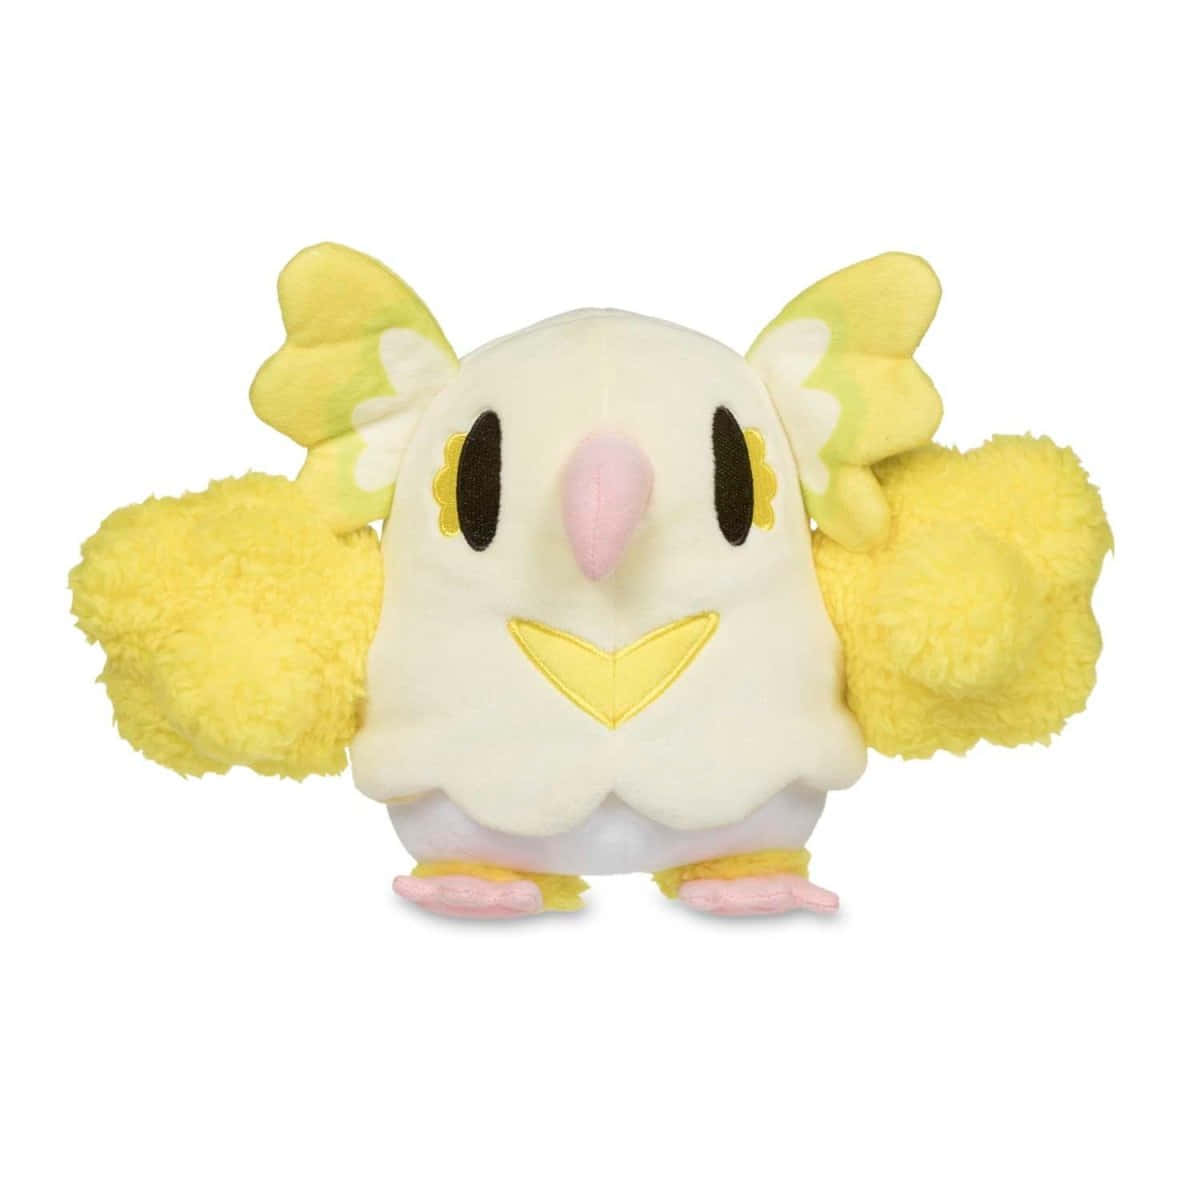 Oricoriopom-pom Plush Translates To Oricorio Pom-pom Mjukis. It Could Be A Name Of A Wallpaper Featuring A Plush Toy Of The Oricorio Pom-pom Character. Wallpaper